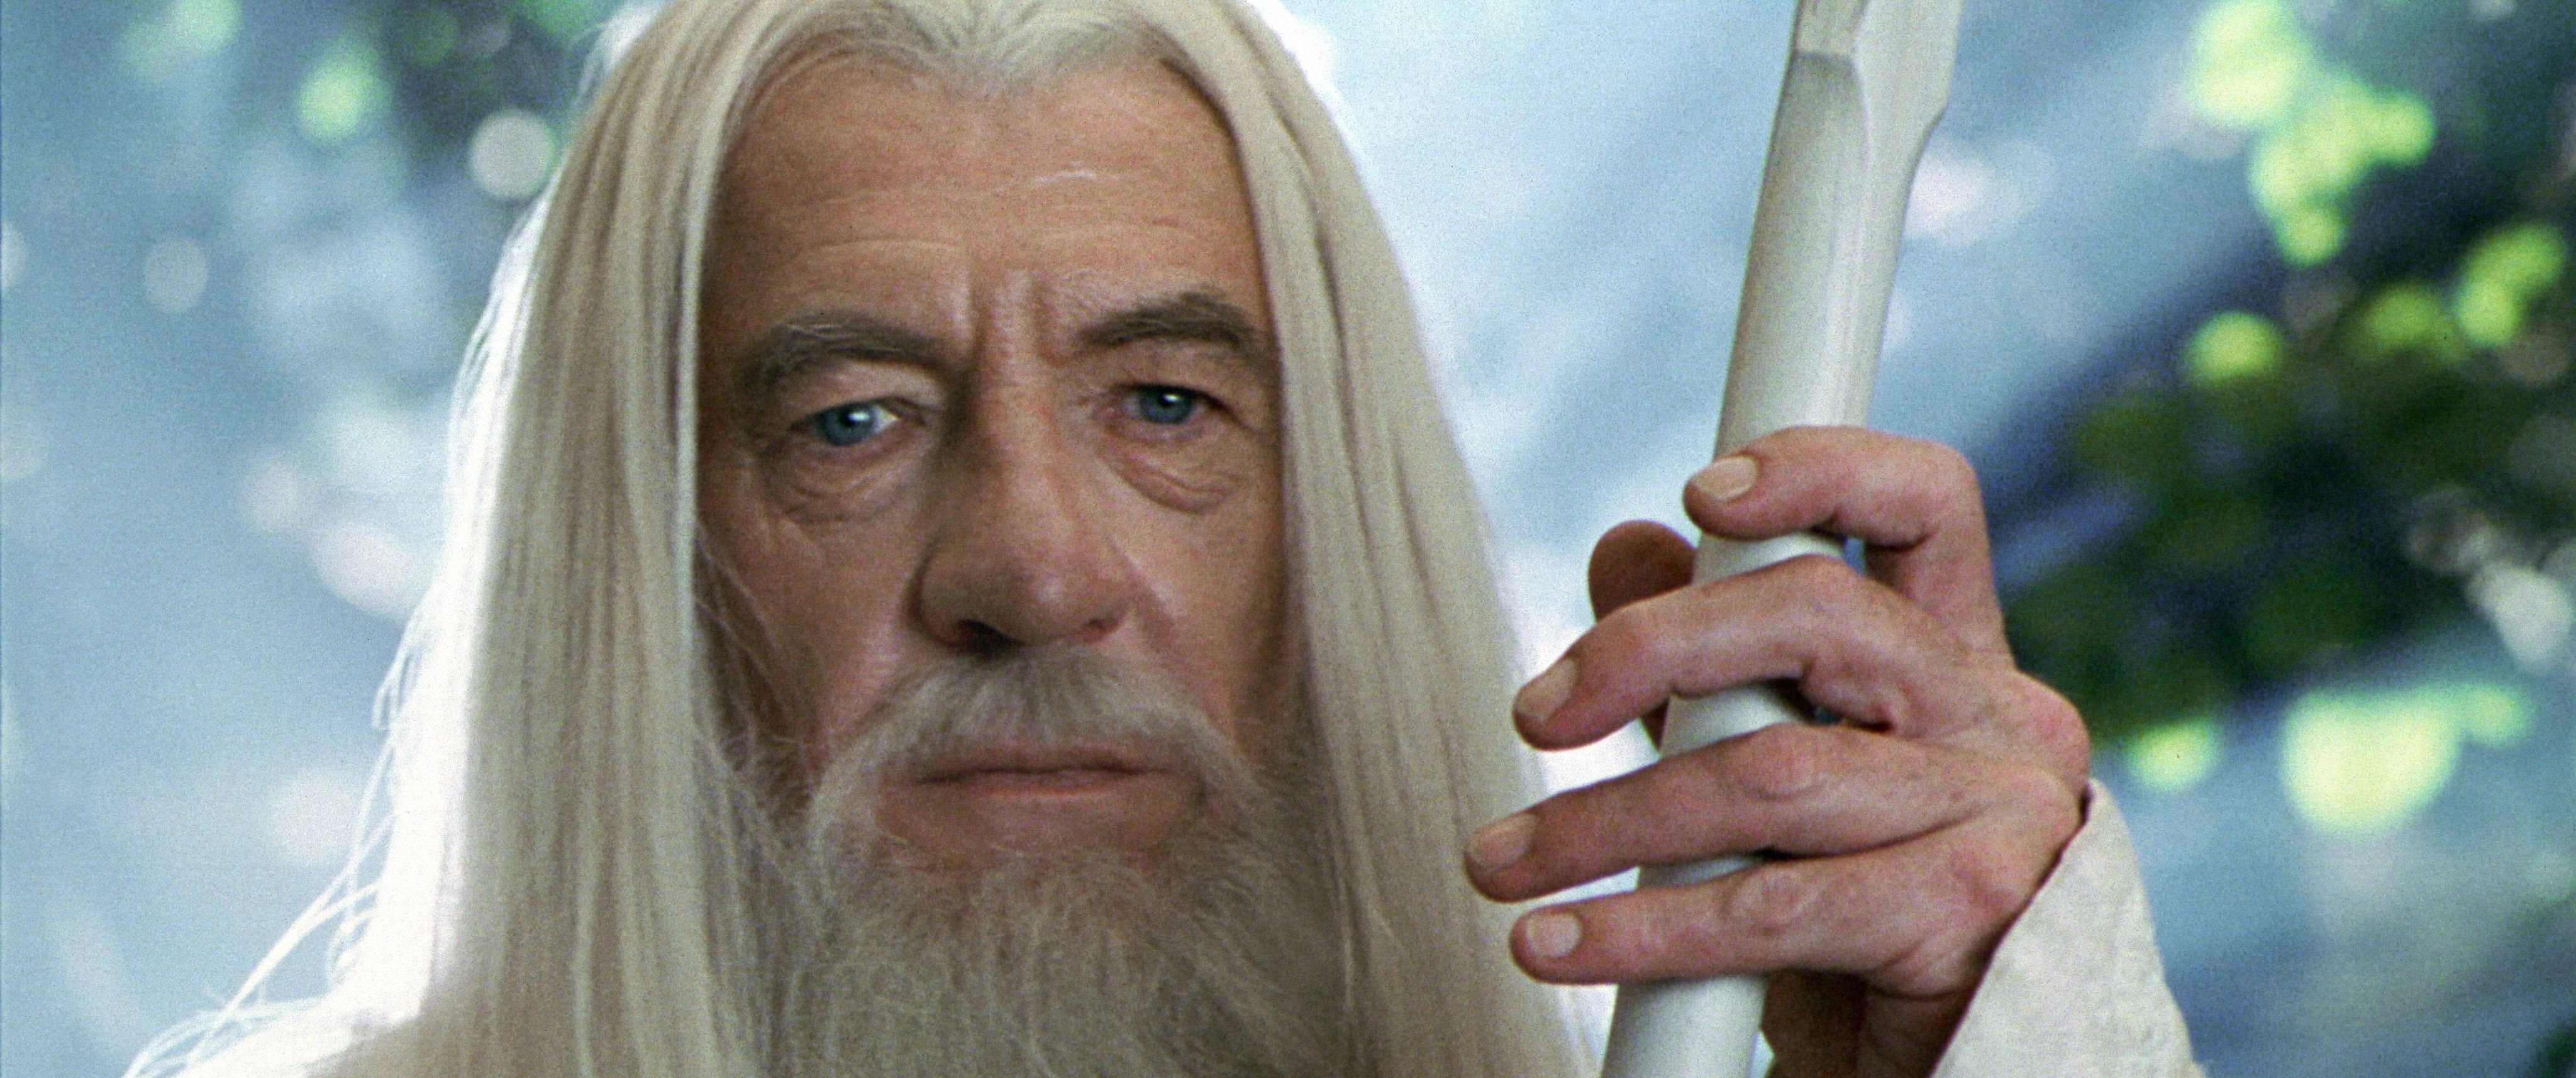 Did Ian McKellen wear a prosthetic nose to play Gandalf in either set of  movies? - Quora